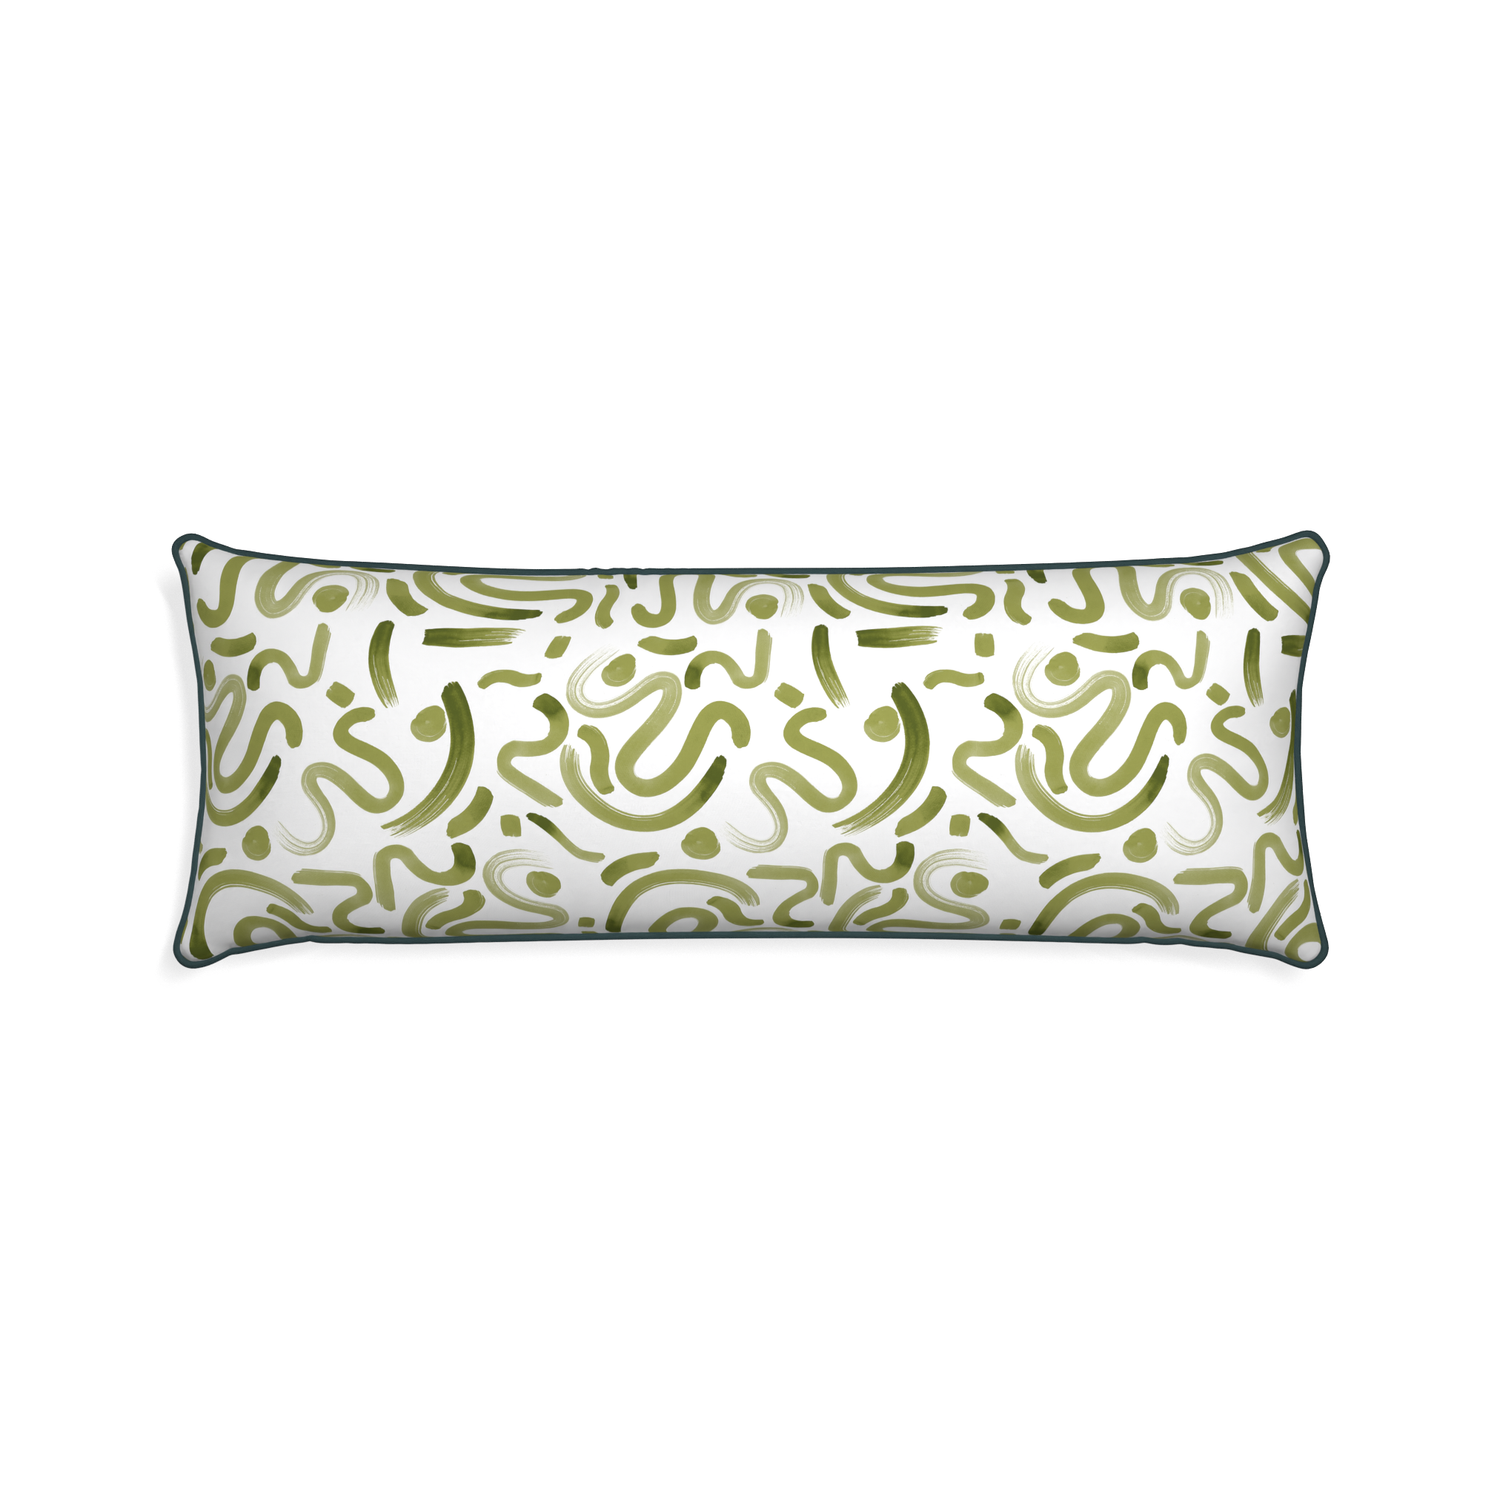 Xl-lumbar hockney moss custom moss greenpillow with p piping on white background